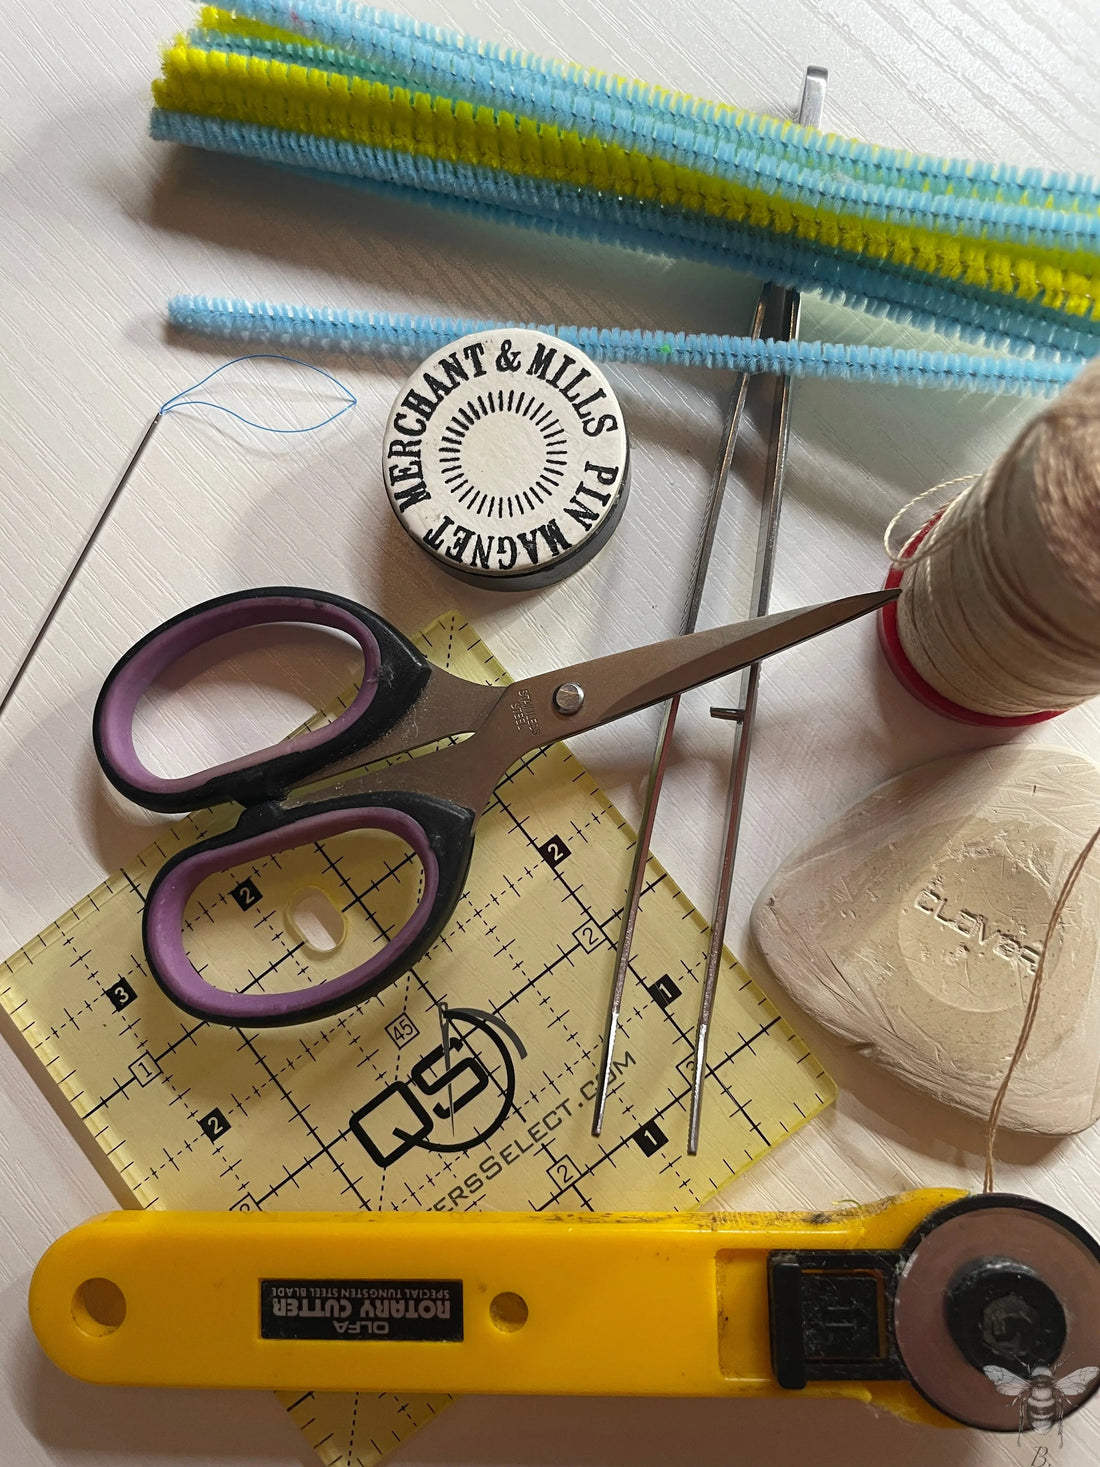 My top 10 Favourite Quilting tools that everyone should have.